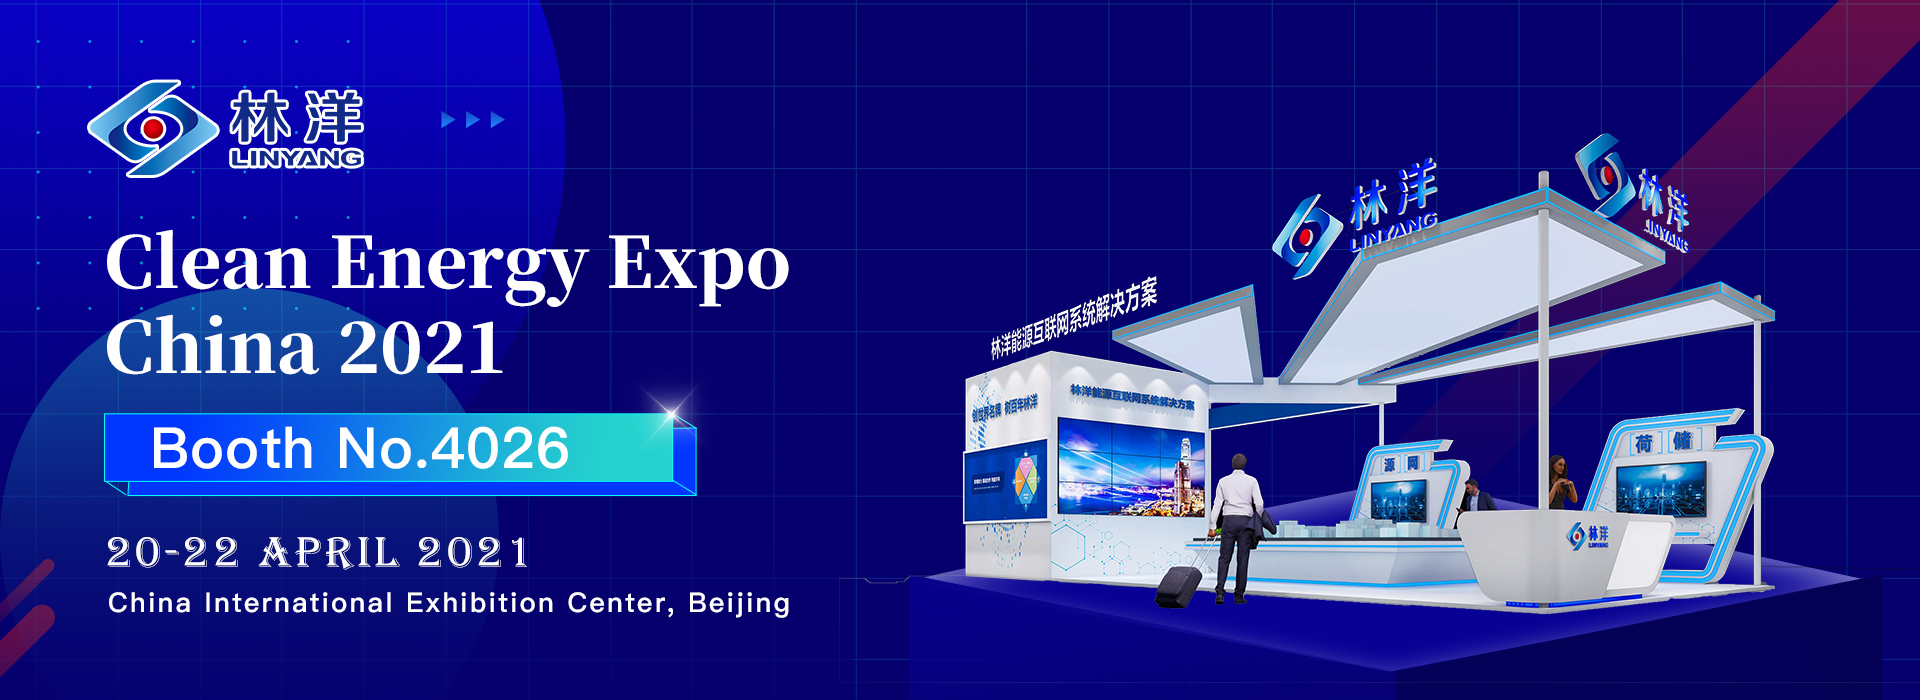 Welcome to Linyang’s booth No. 4026 at Clean Energy Expo China 2021